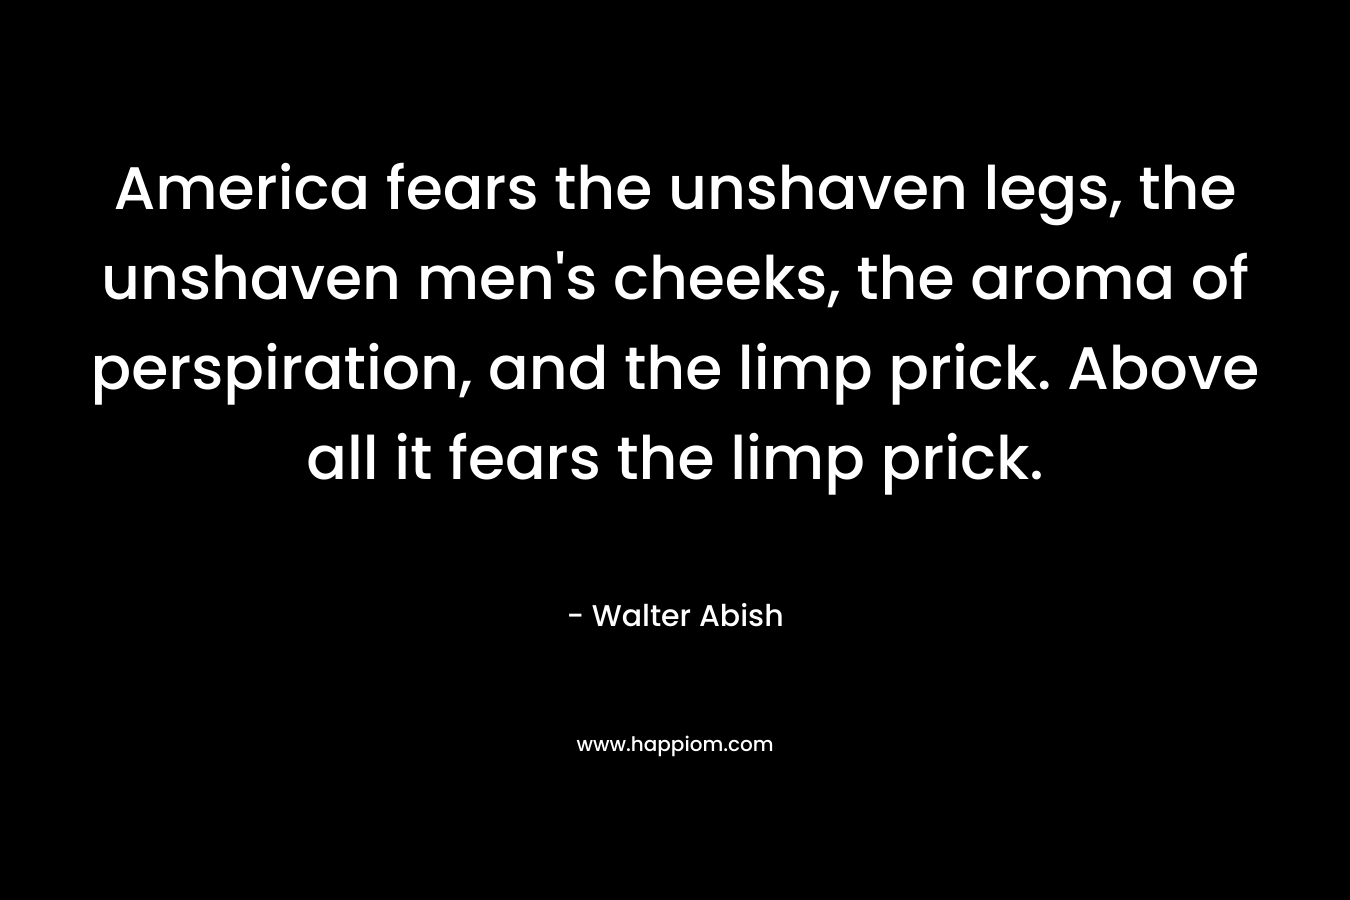 America fears the unshaven legs, the unshaven men's cheeks, the aroma of perspiration, and the limp prick. Above all it fears the limp prick.